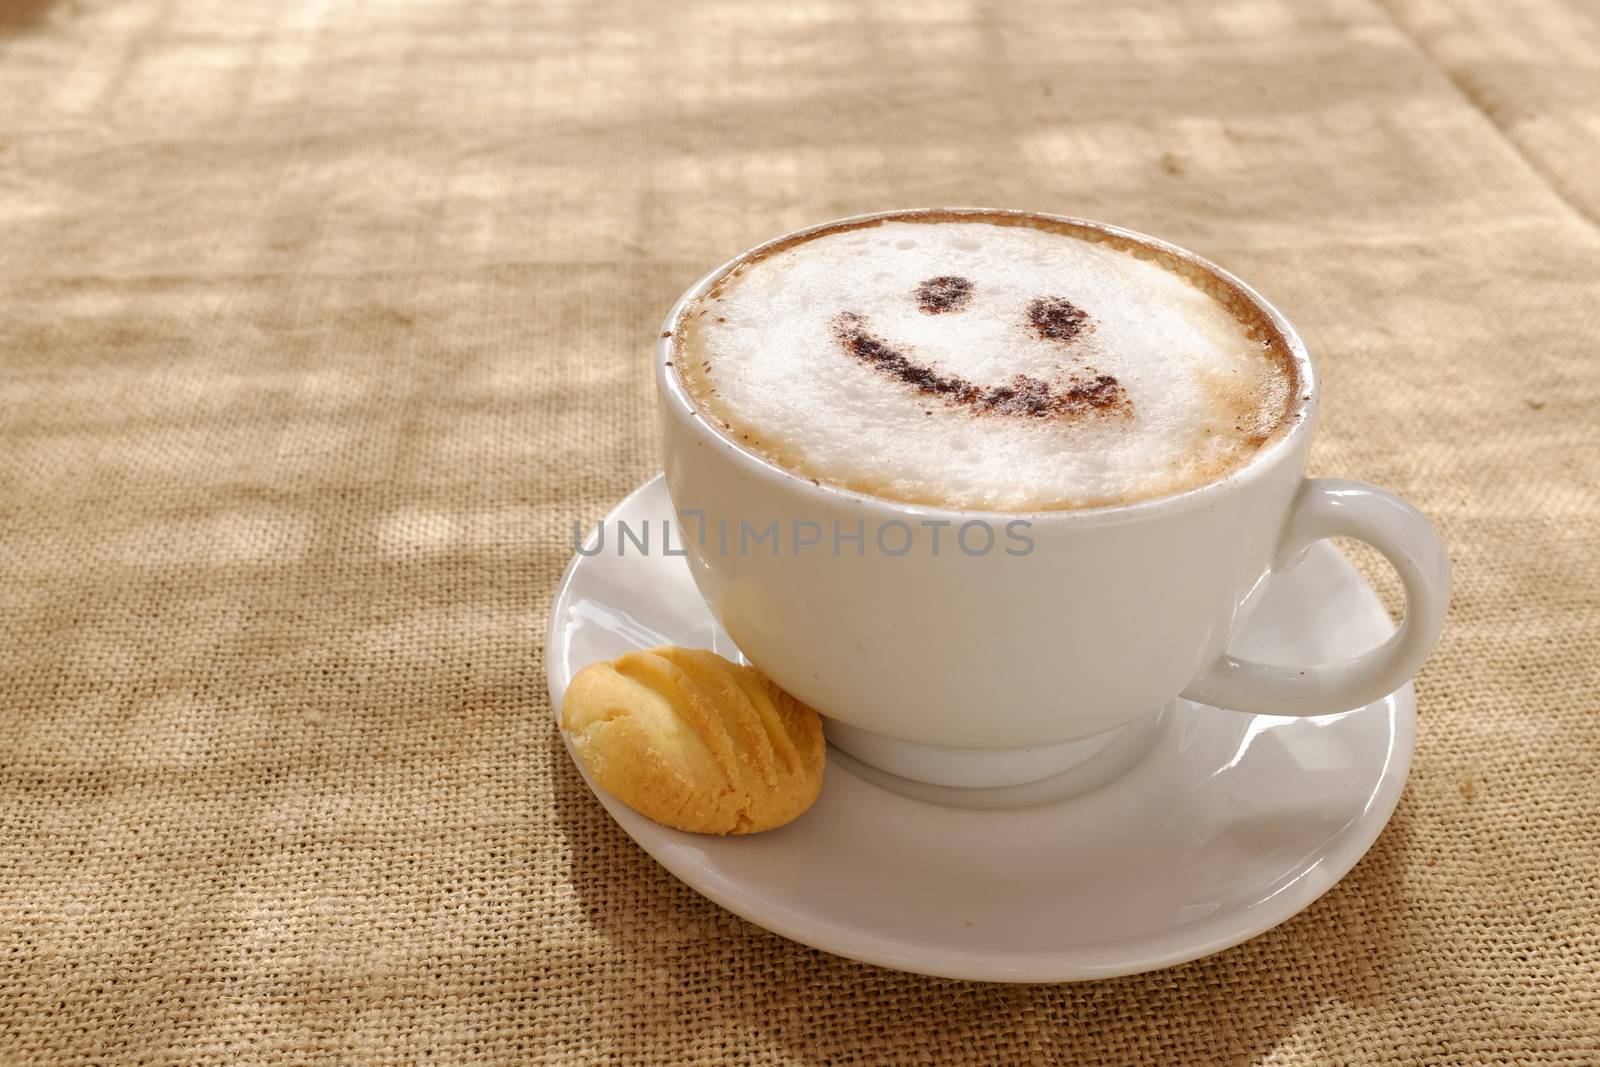 Coffee cappuccino with foam or chocolate smiling welcome happy face in restaurant or hotel